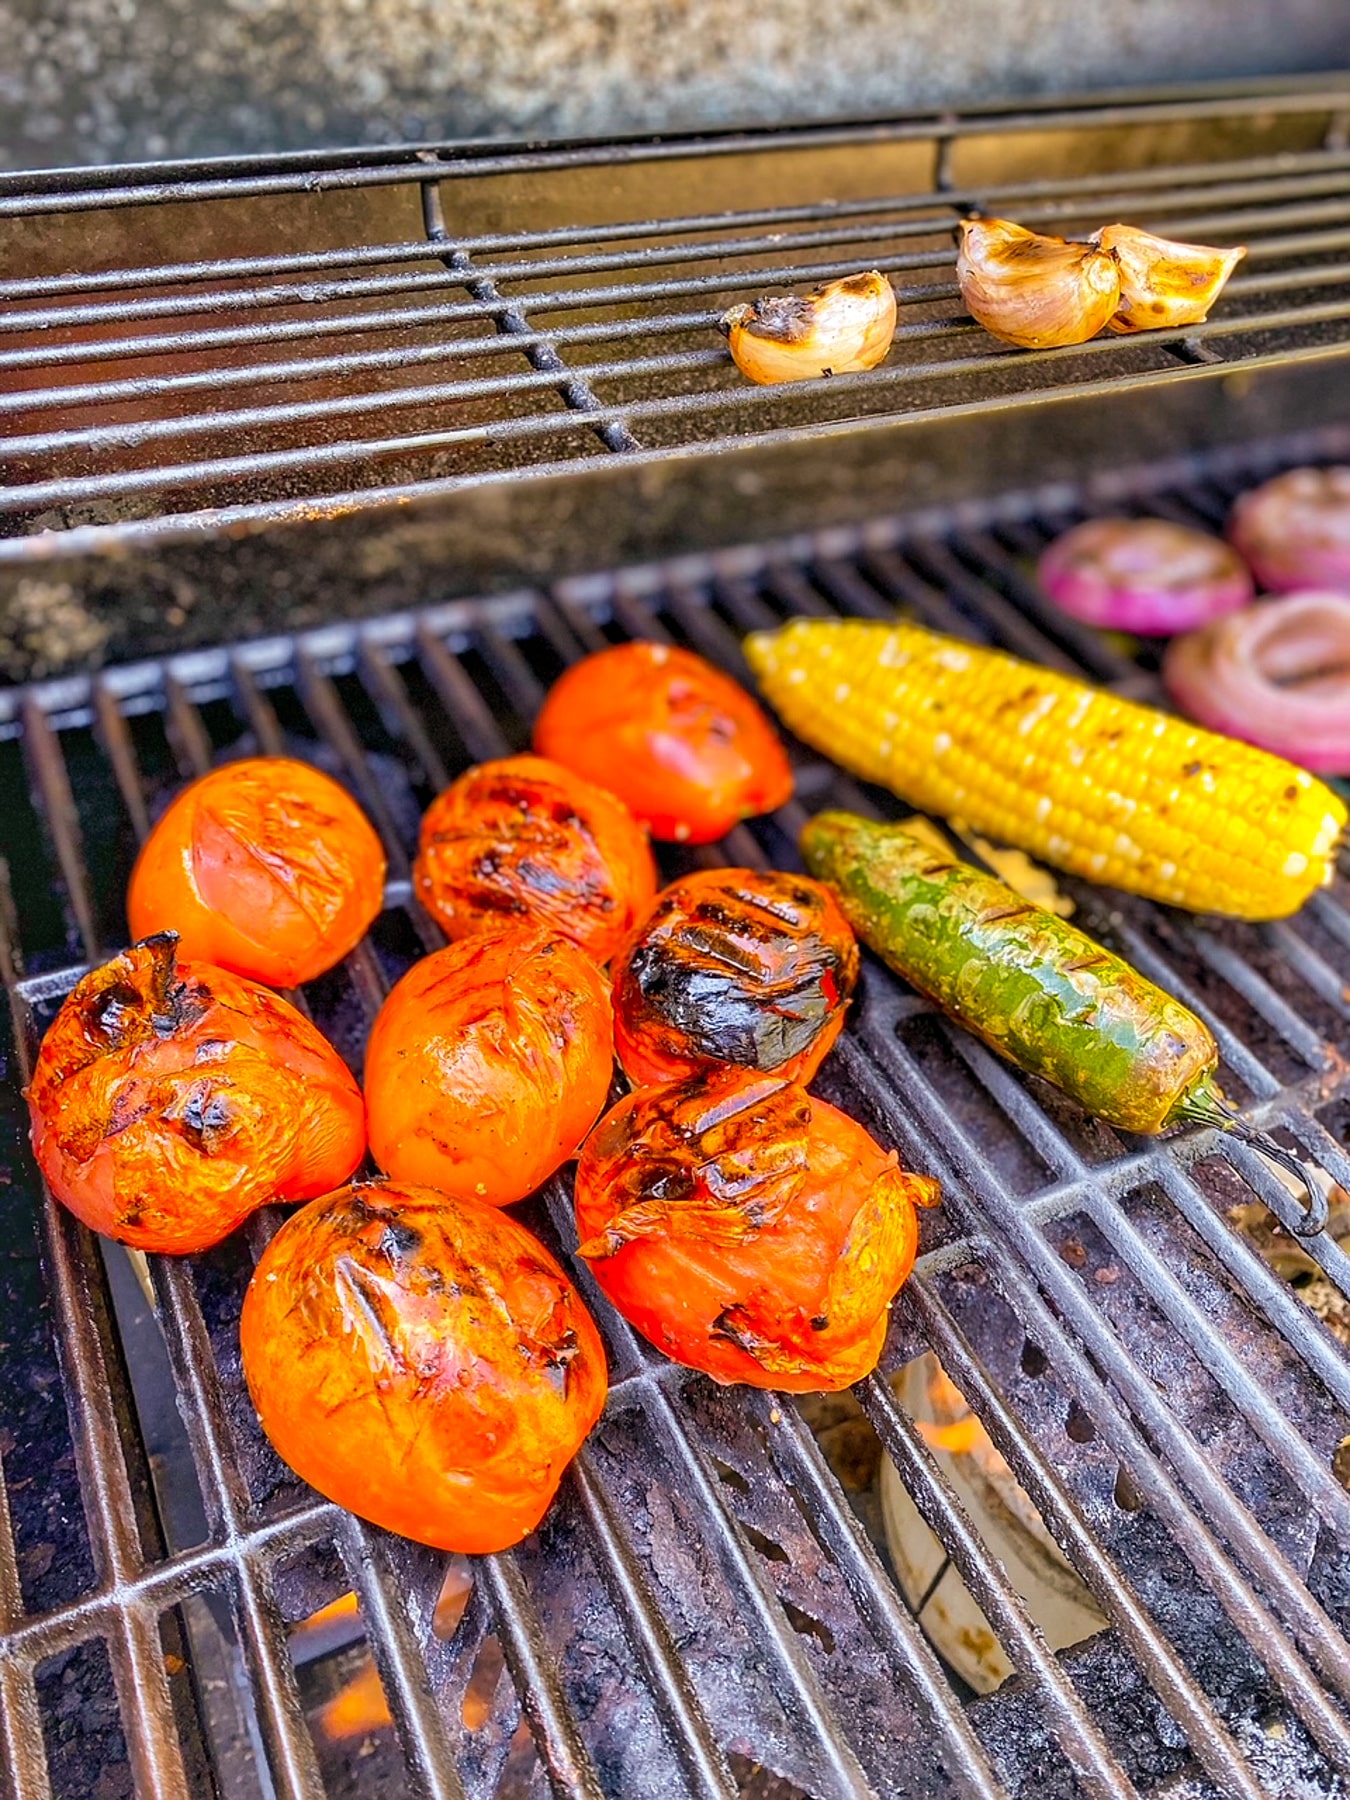 Charred veggies on the grill